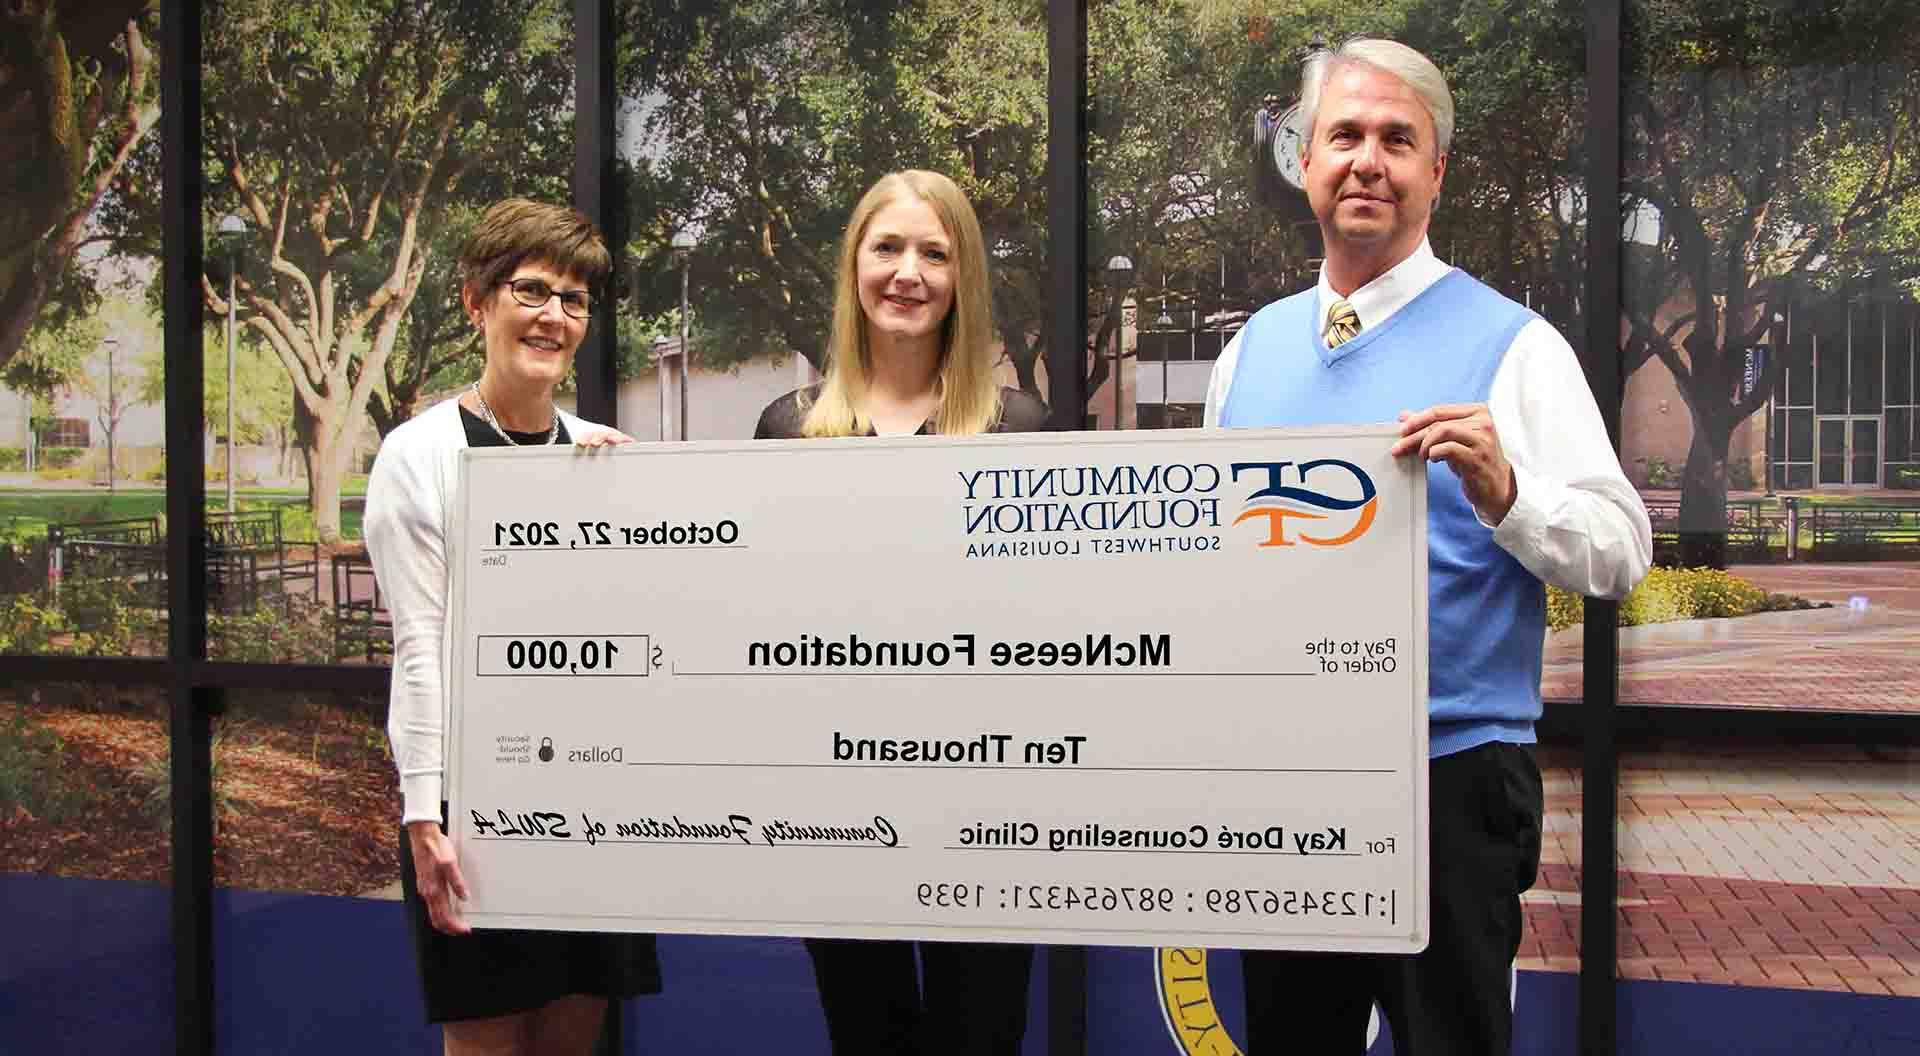 On hand for the donation are, from left, Dr. Wade Rousse, McNeese vice president for university advancement, April Broussard, operations director for the Kay Doré Counseling Clinic and Sara McLeod Judson, president and CEO of the Community Foundation of Southwest Louisiana. McNeese Photo